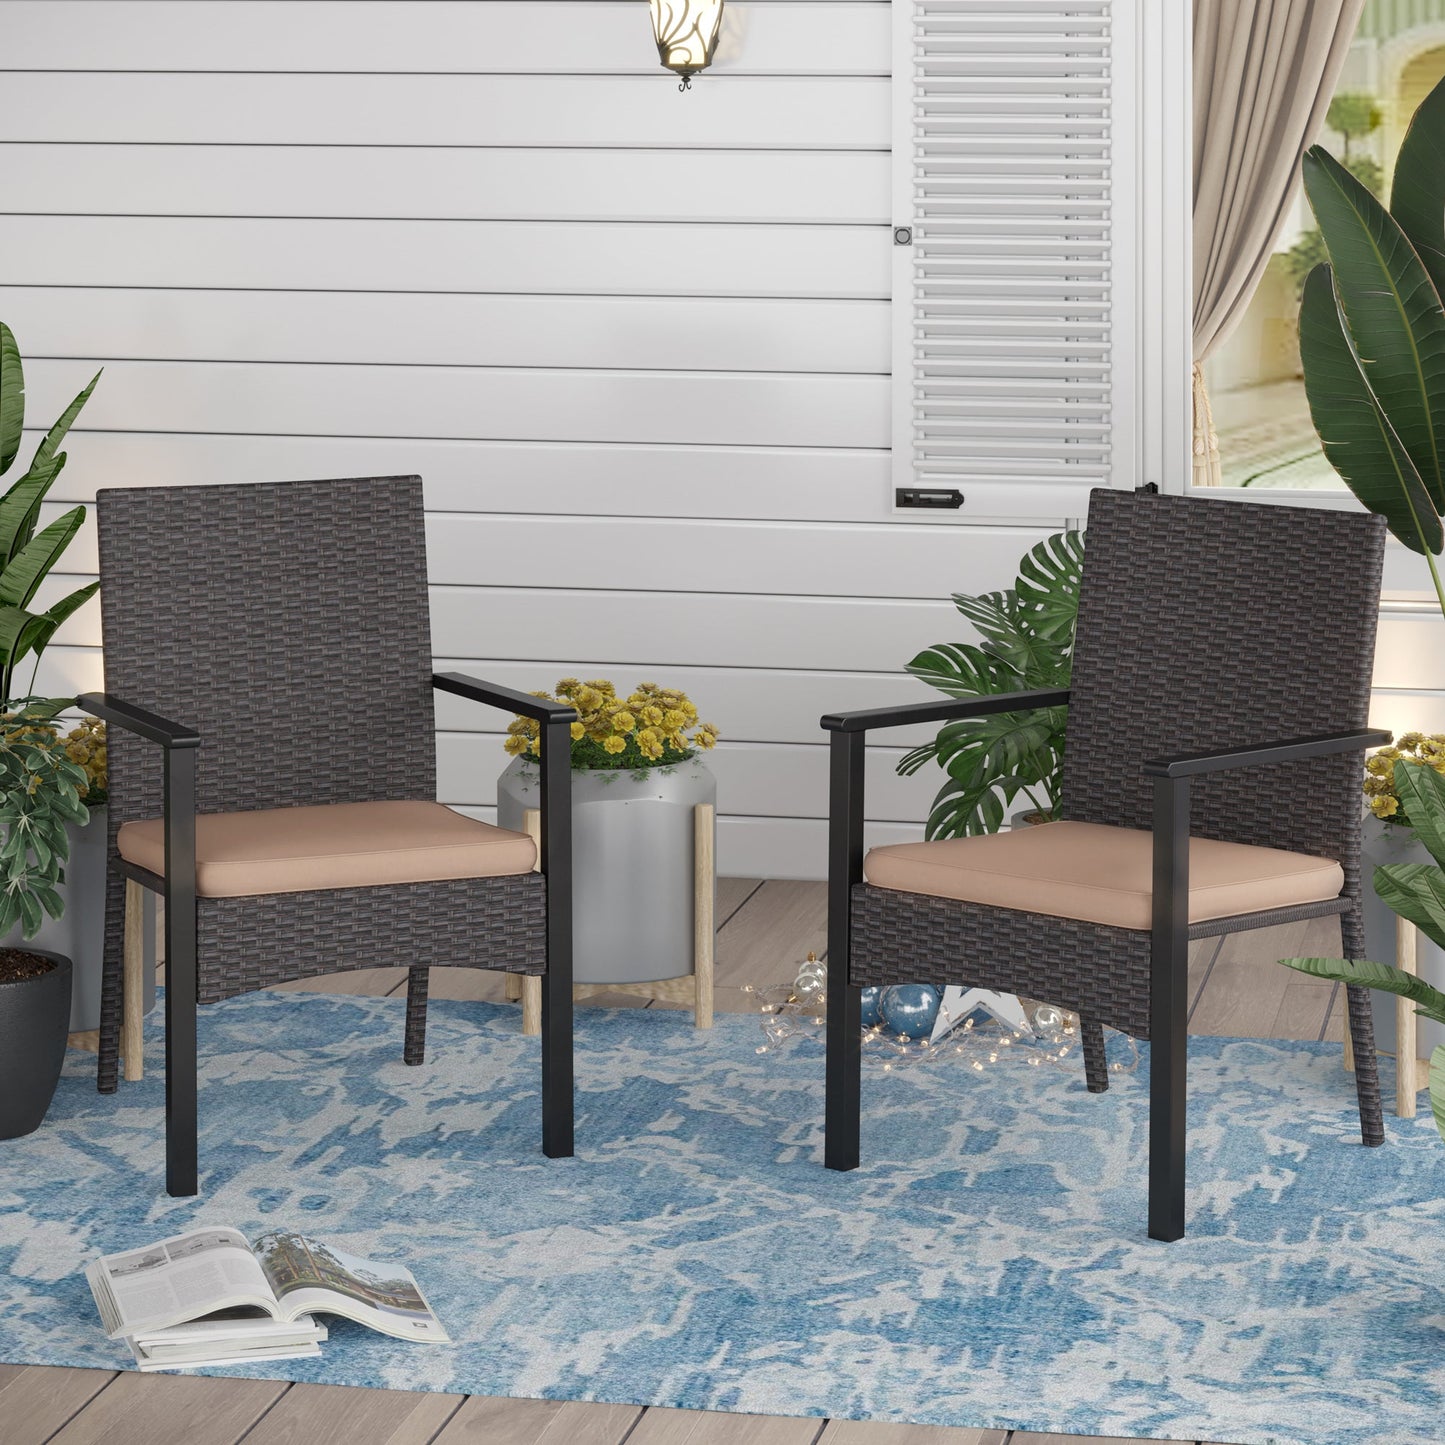 Sophia & William Set of 2 Patio Wicker Rattan Dining Chairs with Beige Cushion